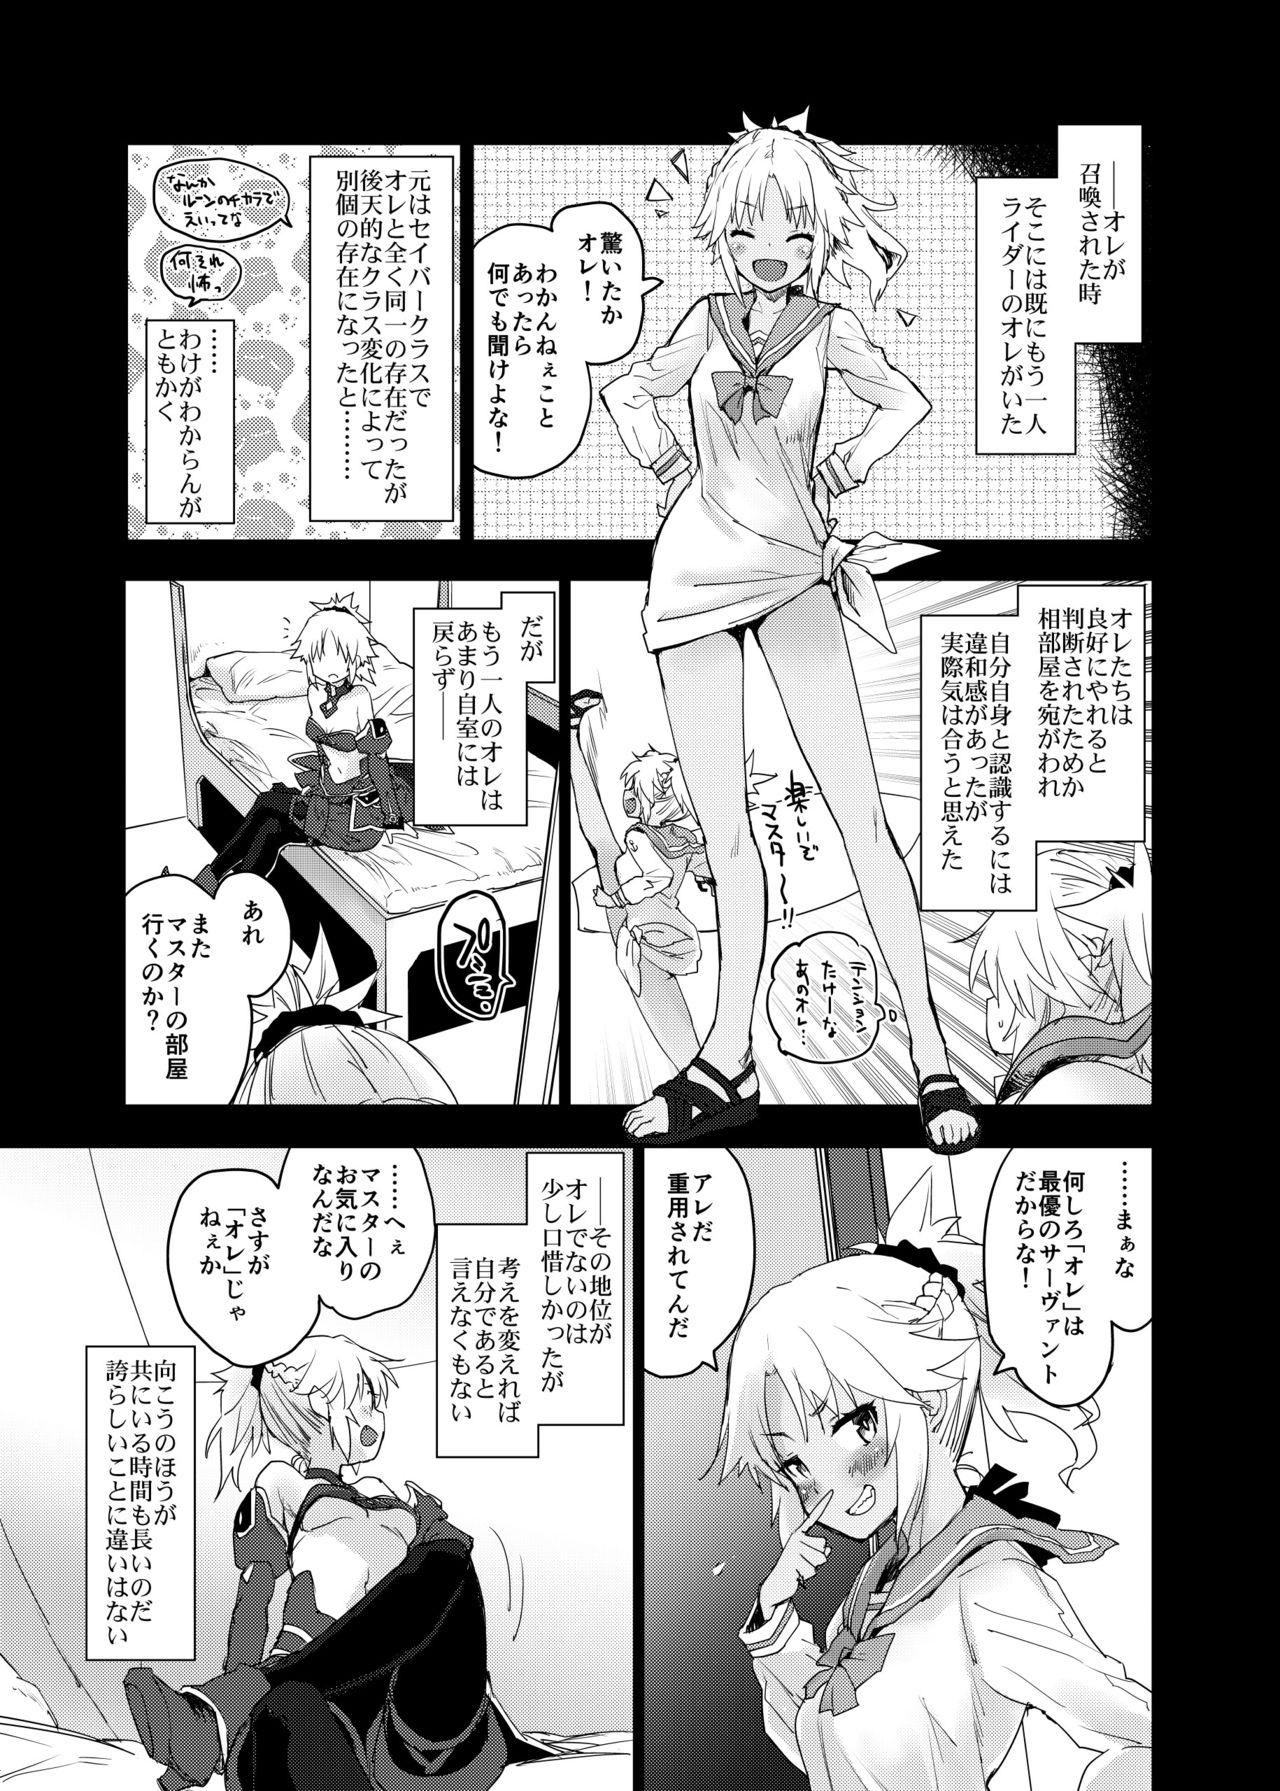 Money With My Honey Knight - Fate grand order Seduction Porn - Page 4